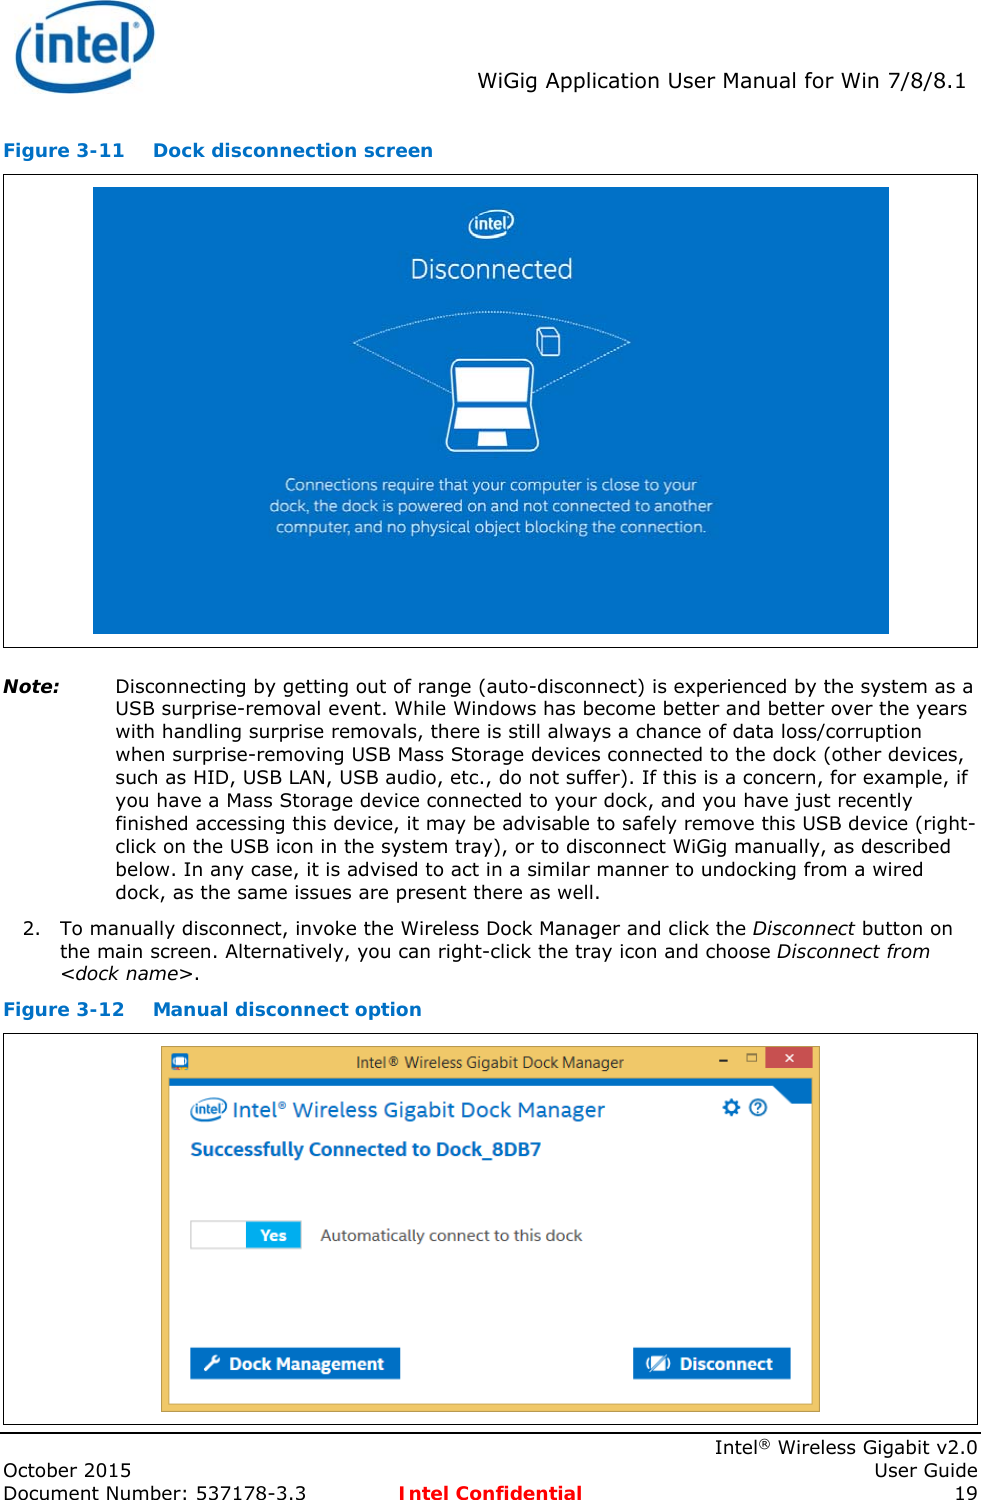  WiGig Application User Manual for Win 7/8/8.1    Intel® Wireless Gigabit v2.0 October 2015    User Guide Document Number: 537178-3.3  Intel Confidential 19 Figure 3-11  Dock disconnection screen  Note: Disconnecting by getting out of range (auto-disconnect) is experienced by the system as a USB surprise-removal event. While Windows has become better and better over the years with handling surprise removals, there is still always a chance of data loss/corruption when surprise-removing USB Mass Storage devices connected to the dock (other devices, such as HID, USB LAN, USB audio, etc., do not suffer). If this is a concern, for example, if you have a Mass Storage device connected to your dock, and you have just recently finished accessing this device, it may be advisable to safely remove this USB device (right-click on the USB icon in the system tray), or to disconnect WiGig manually, as described below. In any case, it is advised to act in a similar manner to undocking from a wired dock, as the same issues are present there as well. 2. To manually disconnect, invoke the Wireless Dock Manager and click the Disconnect button on the main screen. Alternatively, you can right-click the tray icon and choose Disconnect from &lt;dock name&gt;. Figure 3-12  Manual disconnect option  